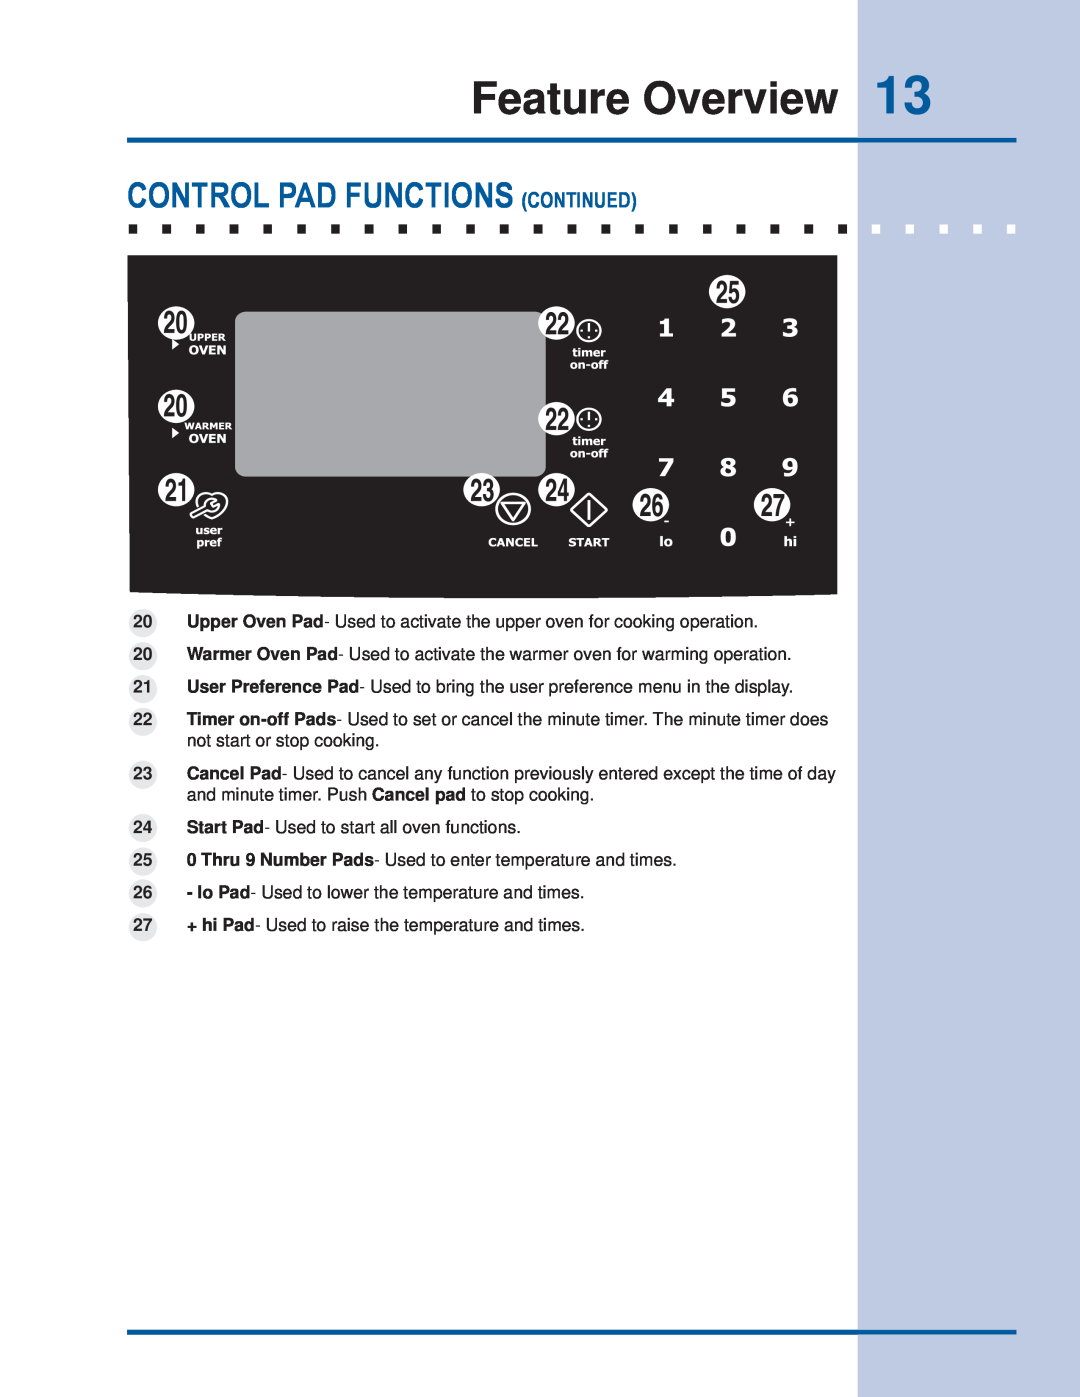 Electrolux EI30ES55JS manual Control Pad Functions Continued, Feature Overview 